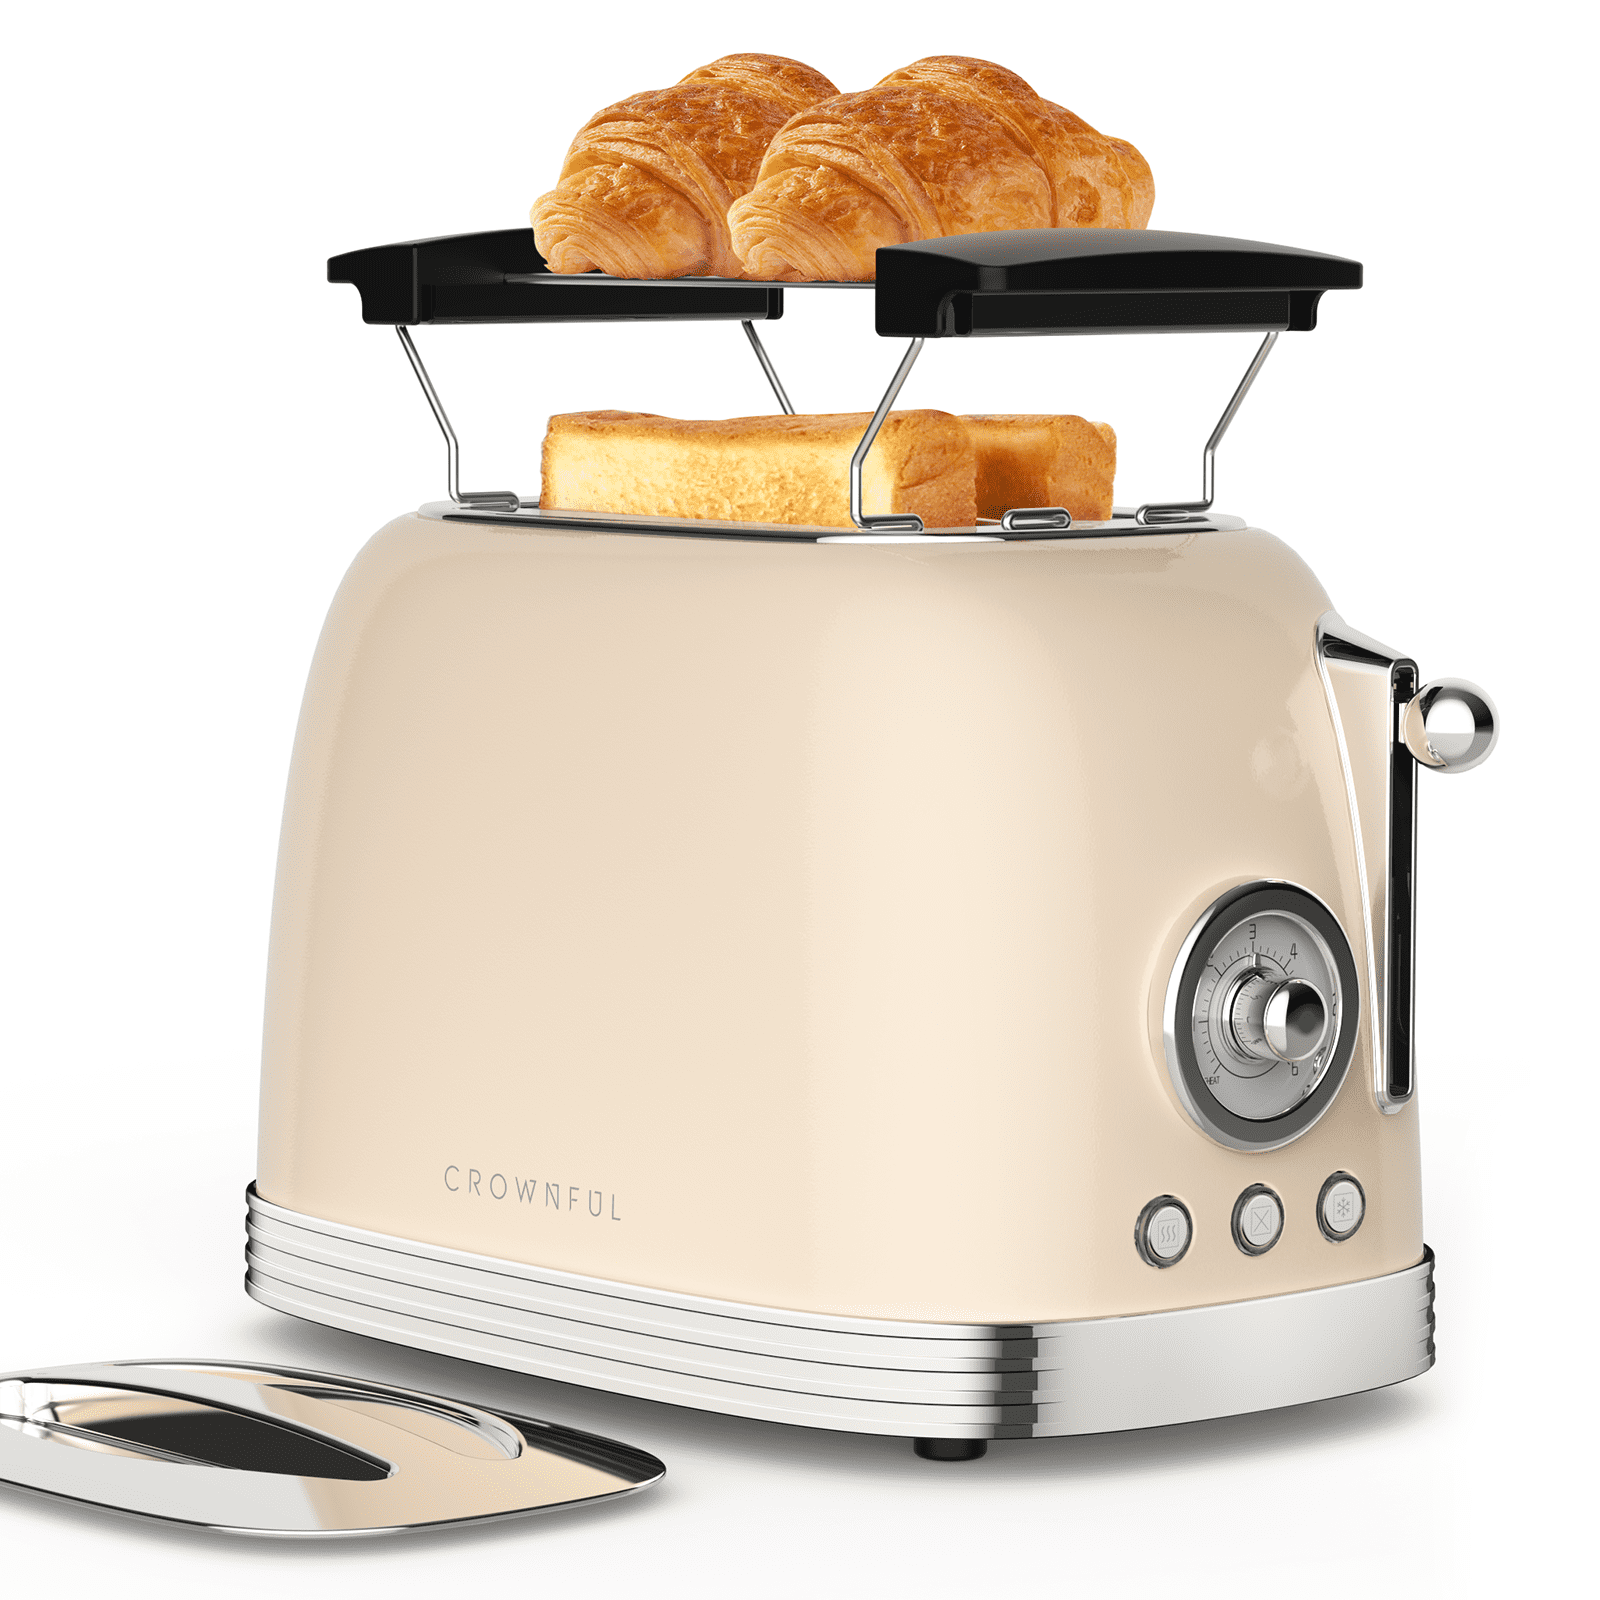 SUS Toaster Easy to Use with Removable Crumb Tray 1 Slice Toaster